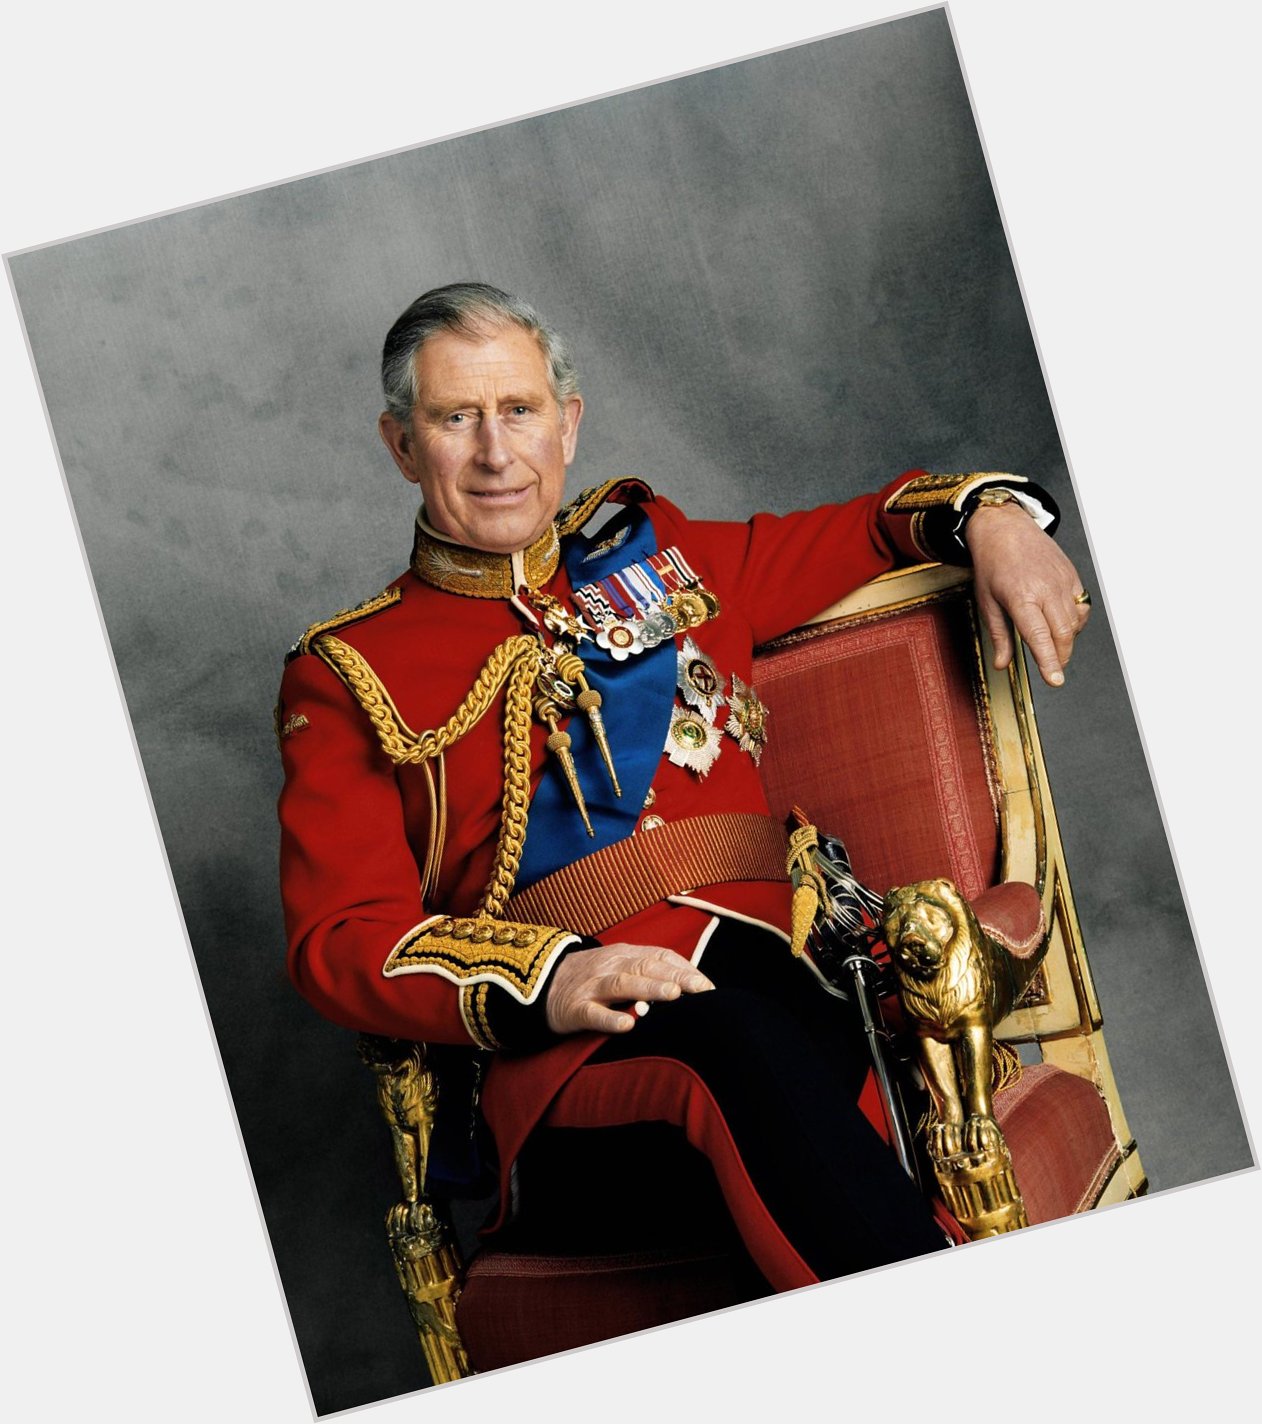 Happy Birthday Prince Charles the Prince of Wales!!! 